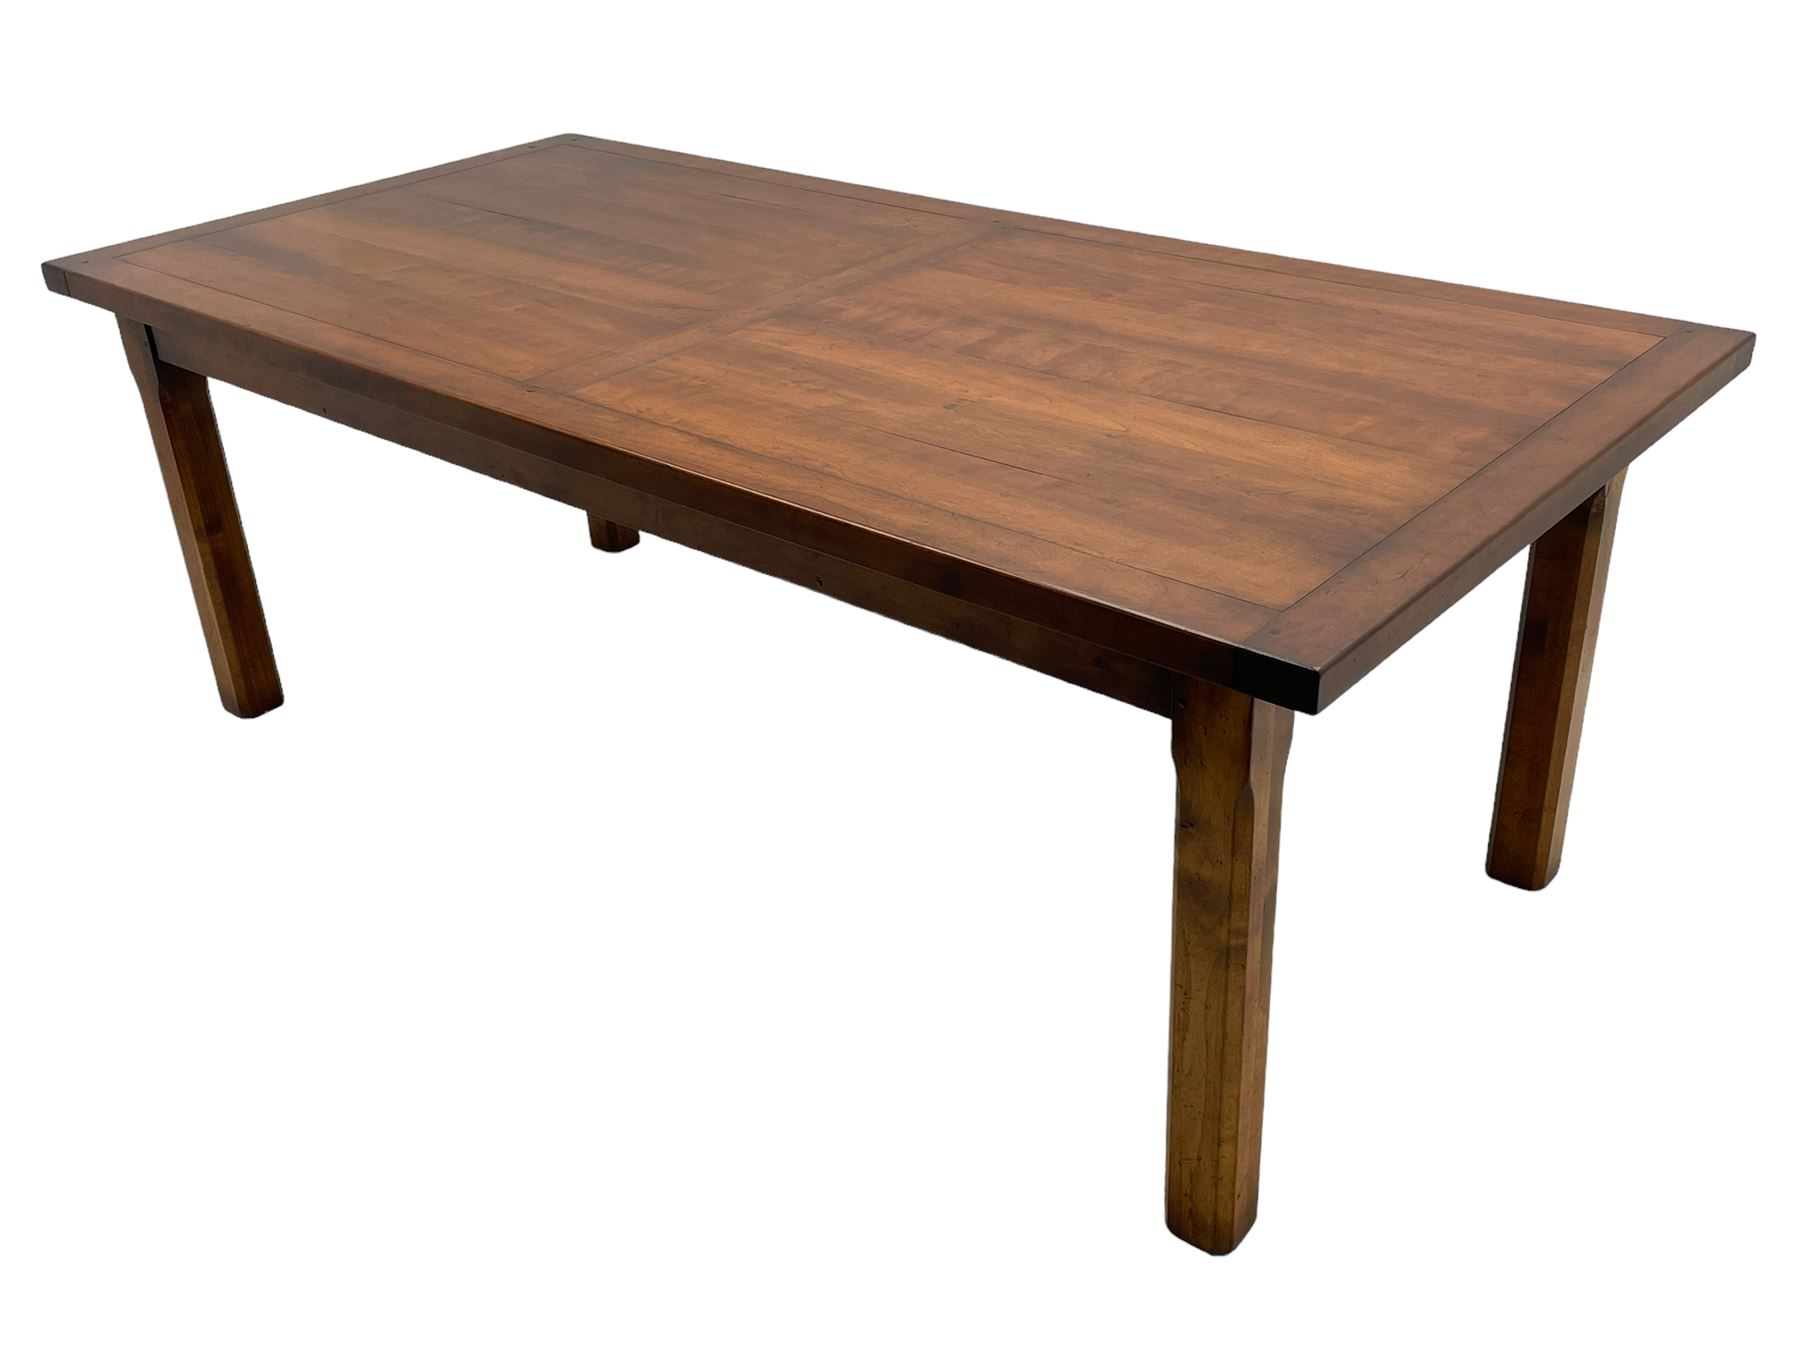 Contemporary French farmhouse design cherry wood dining table - Image 9 of 10